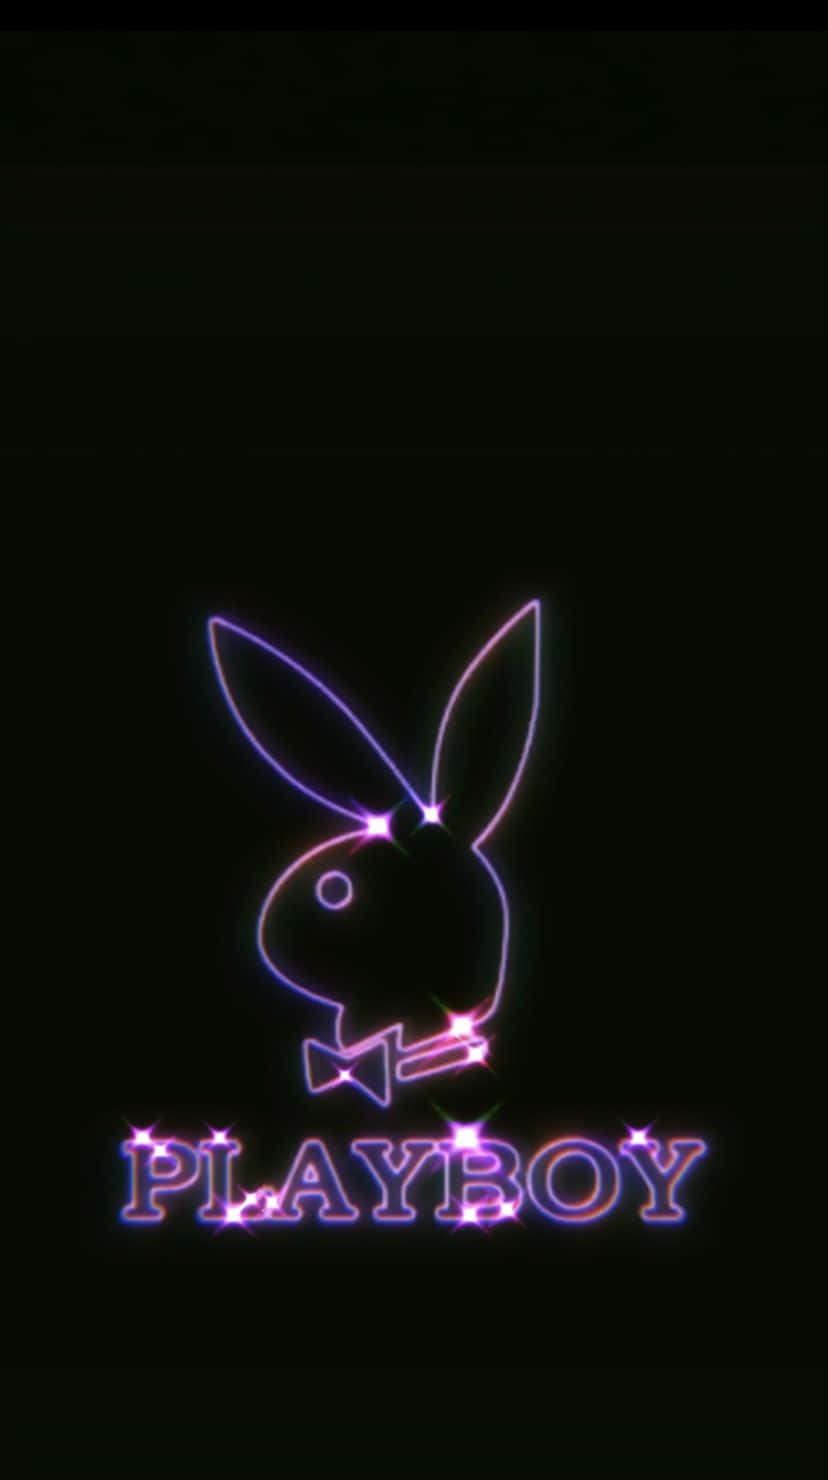 “Playboy is anything but ordinary”